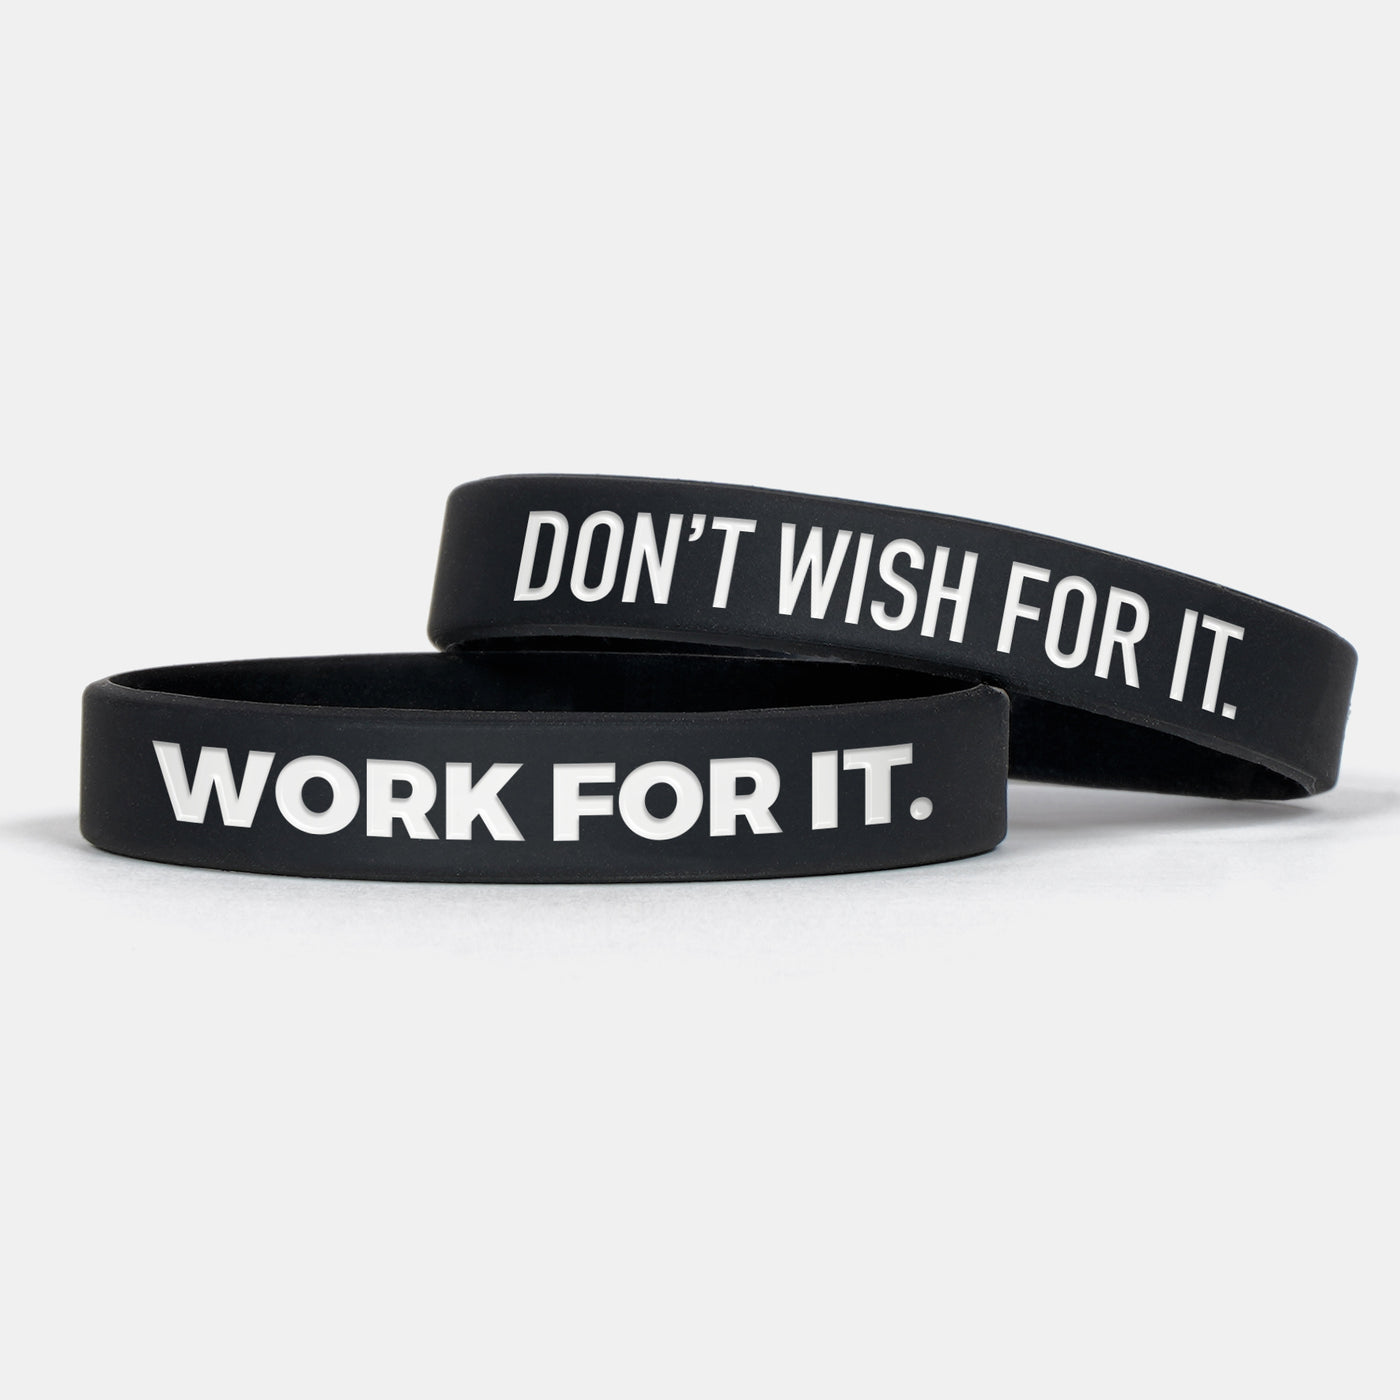 Don't Wish For It. Work For It. Motivational Wristband